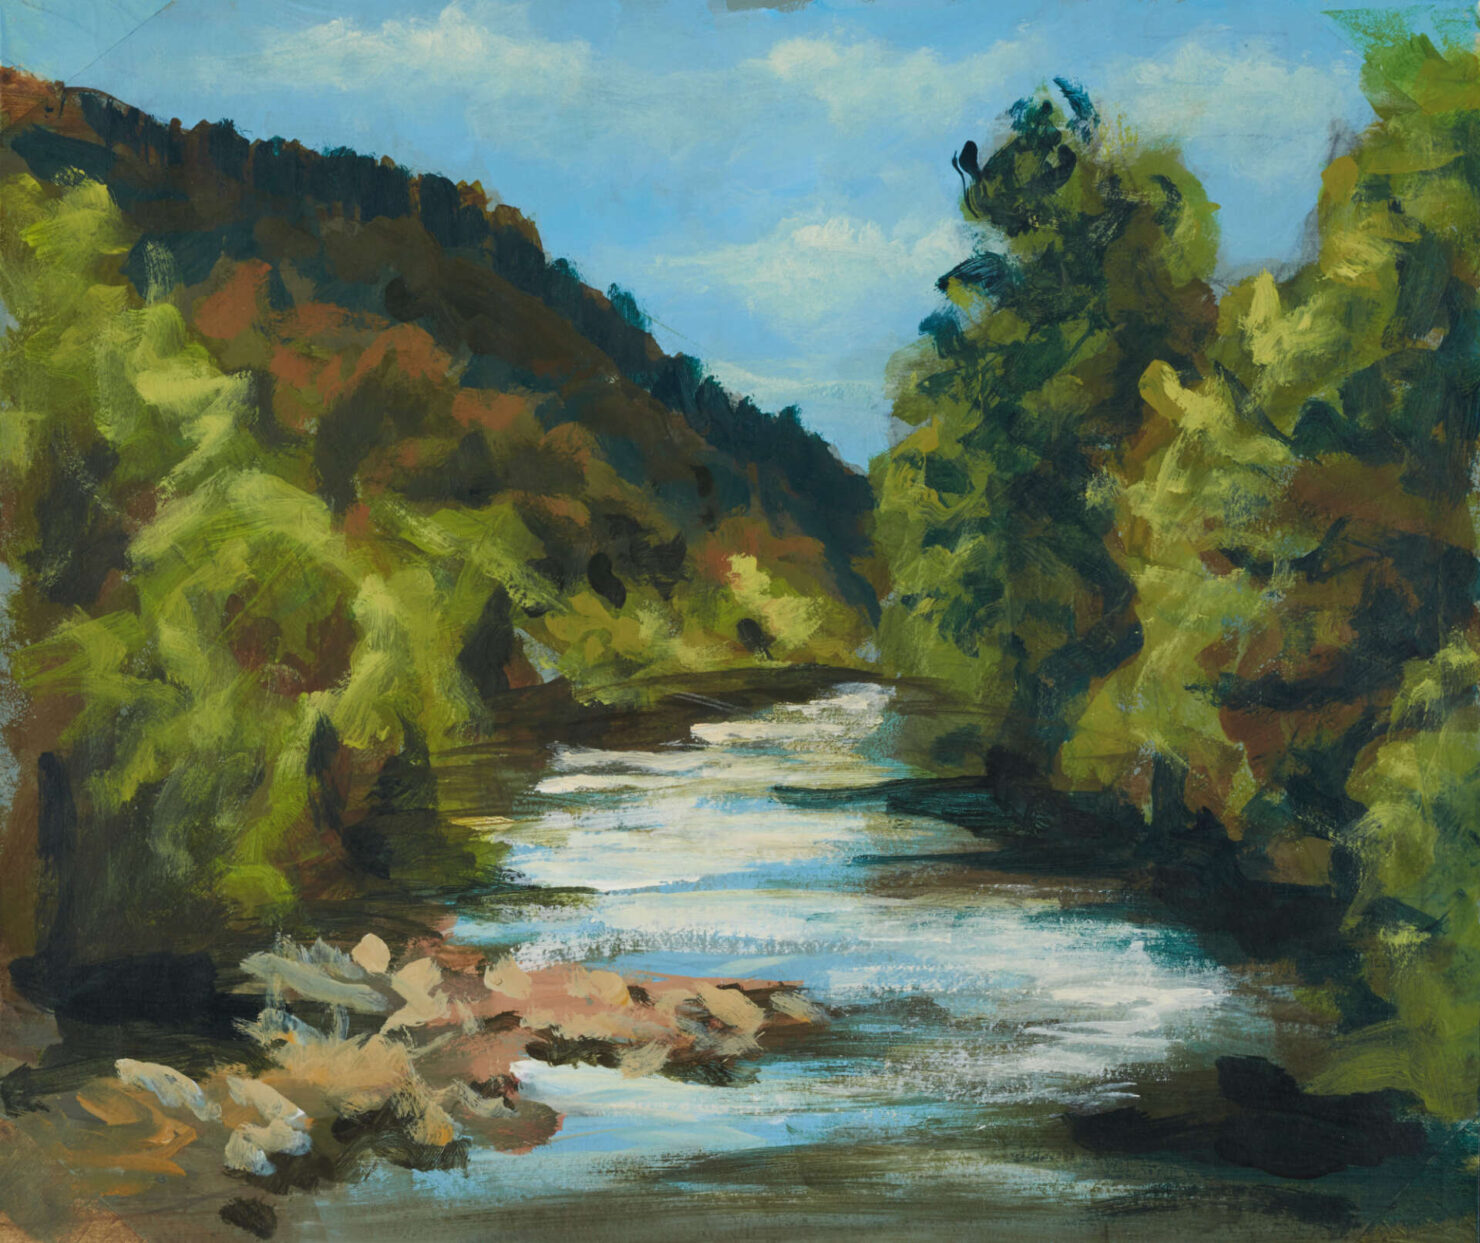 artist rod coyne's painting "meeting of the waters" is shown here.